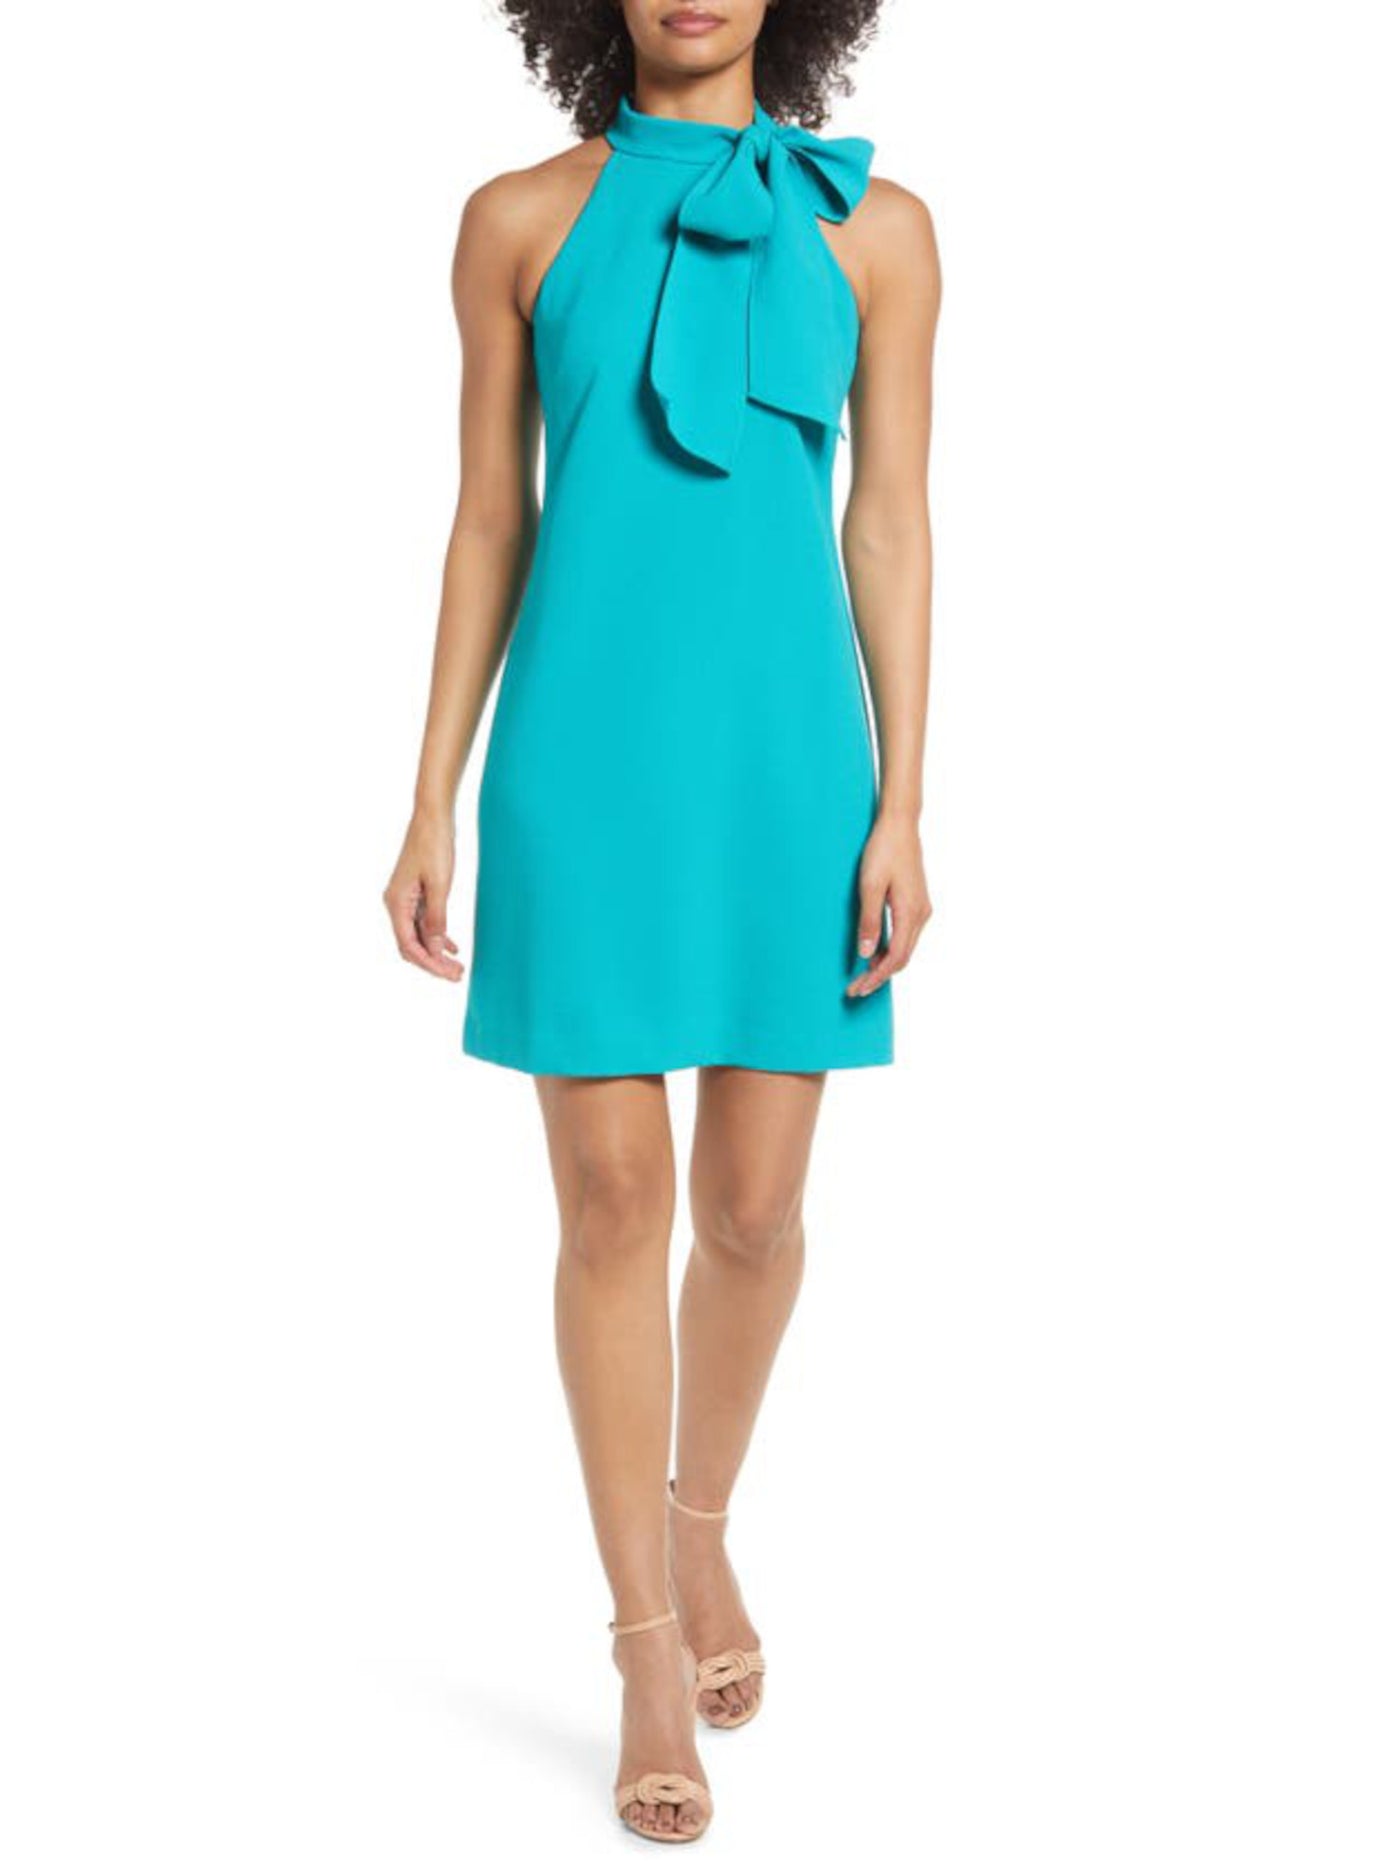 VINCE CAMUTO Womens Turquoise Stretch Zippered Darted Bow Detail Lined Textured Sleeveless Halter Short Wear To Work Shift Dress 14